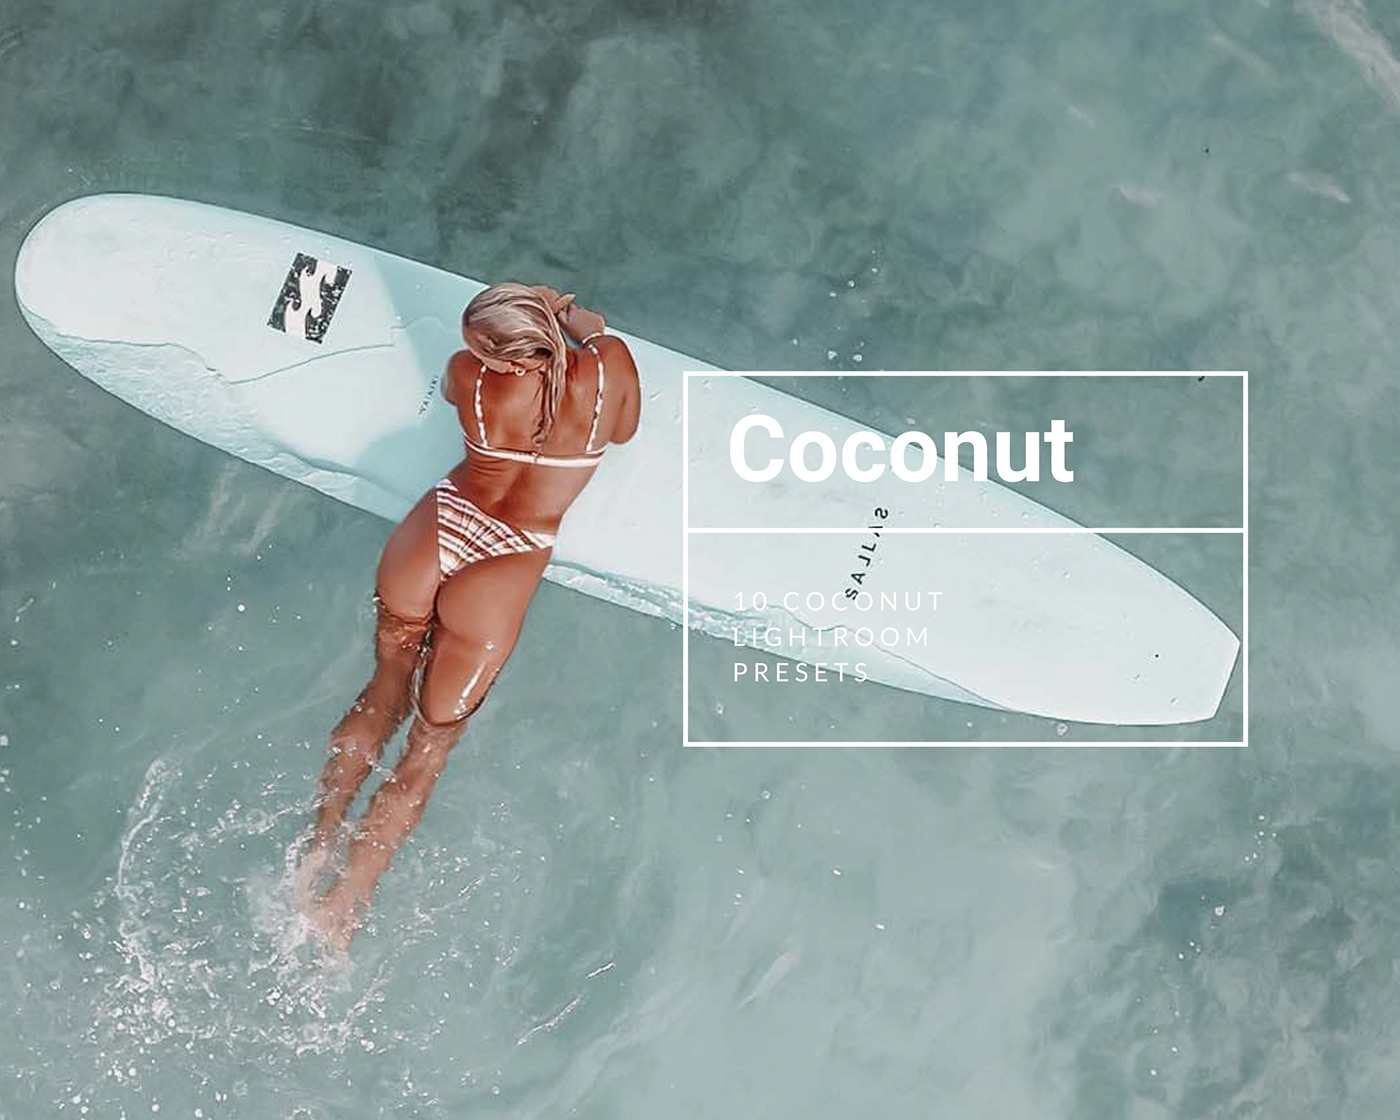 lightroom presets summer photography outdoor photography beach presets bright whites coconut presets mobile presets Photography Filters tropical lifestyle Warm skin tones